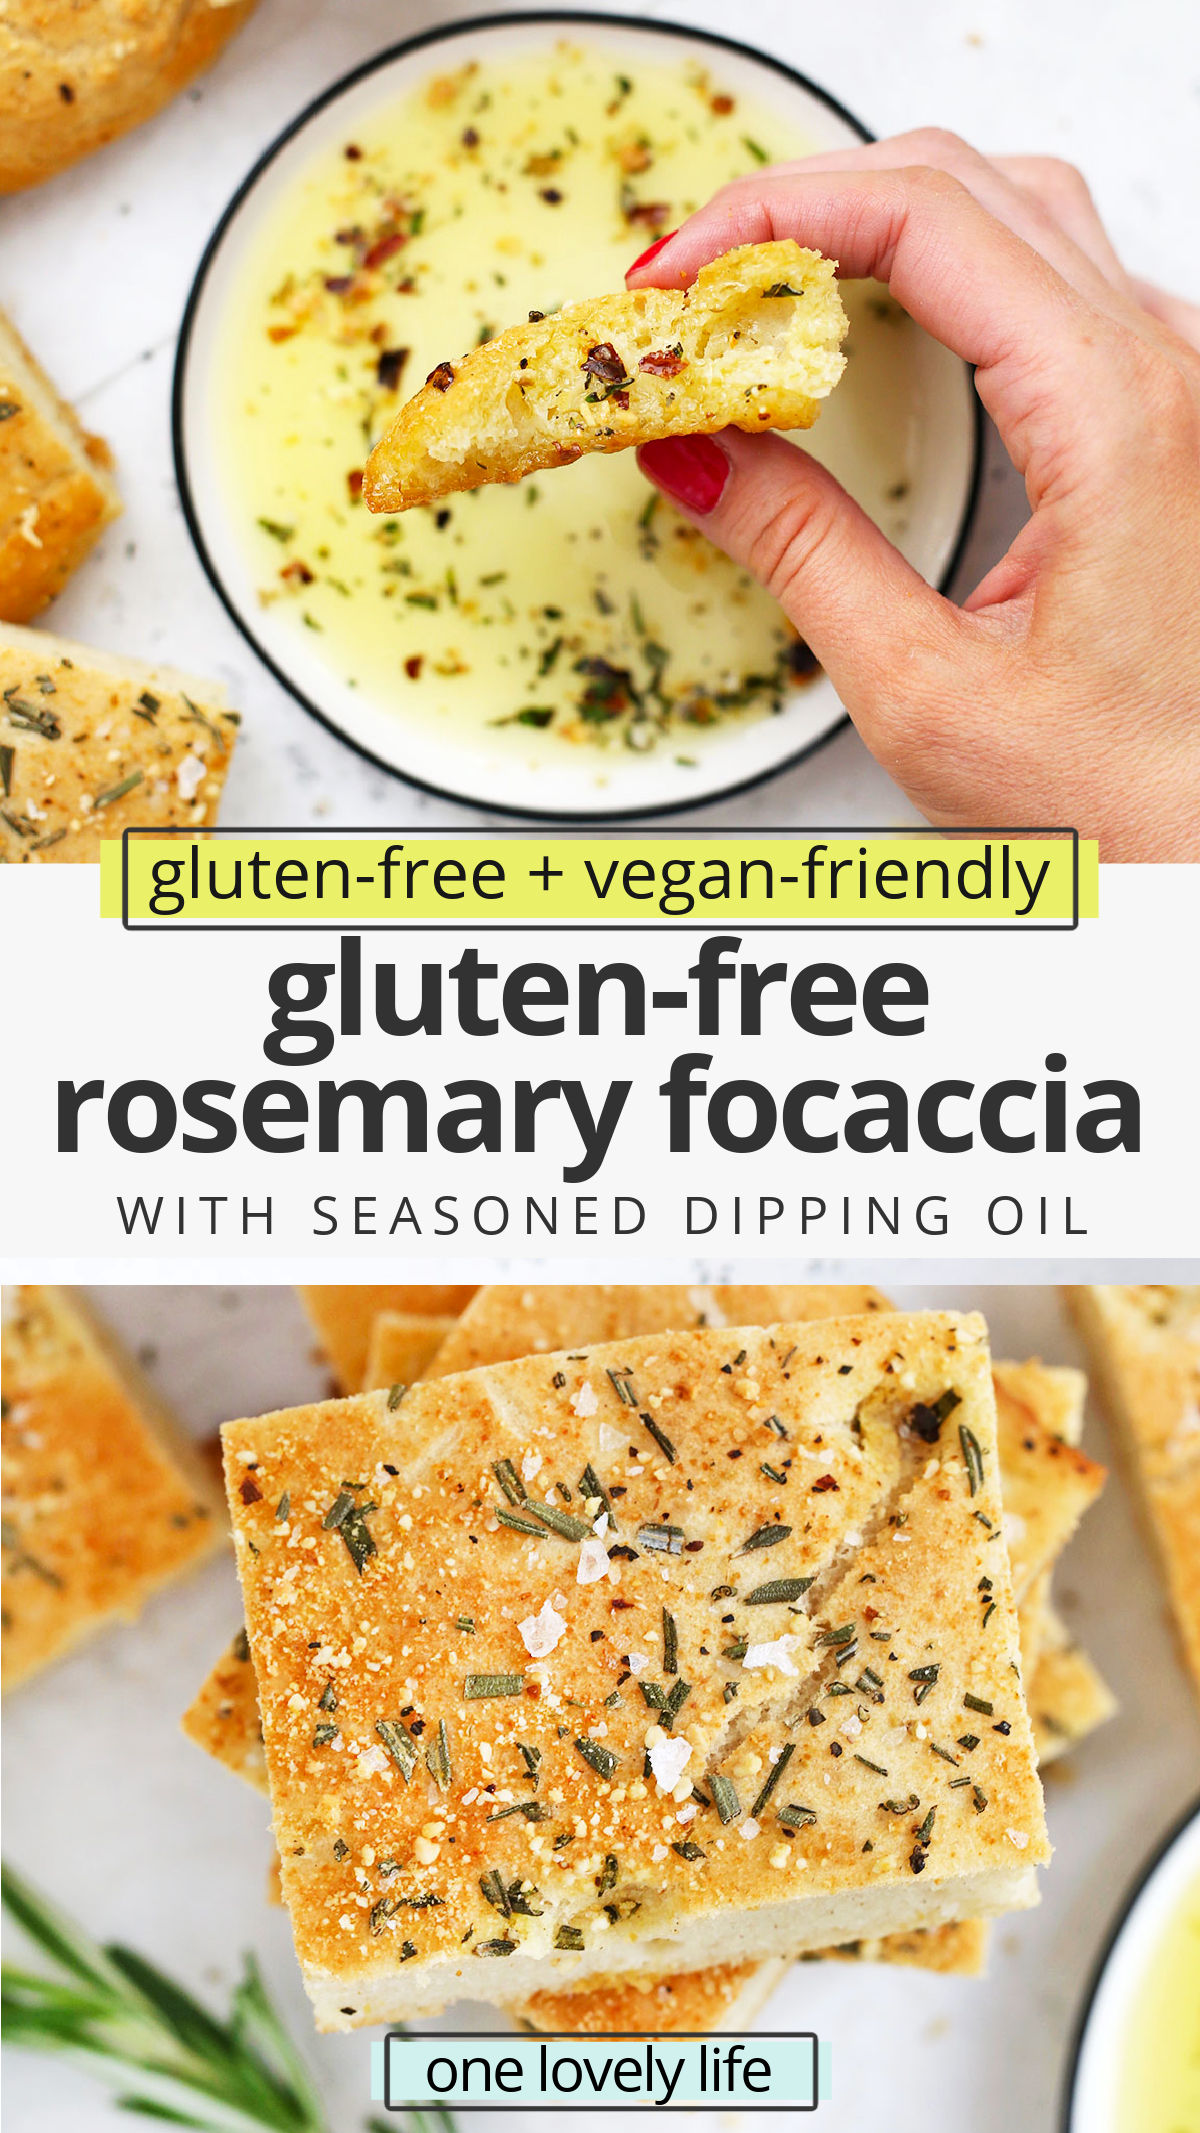 Gluten Free Focaccia - This rosemary focaccia is made entirely gluten free and vegan! It's easier than you think and has the perfect crispy crust and tender, light center. Yum! // gluten free focaccia recipe // rosemary focaccia #focaccia #glutenfree #glutenfreebread #glutenfreebaking